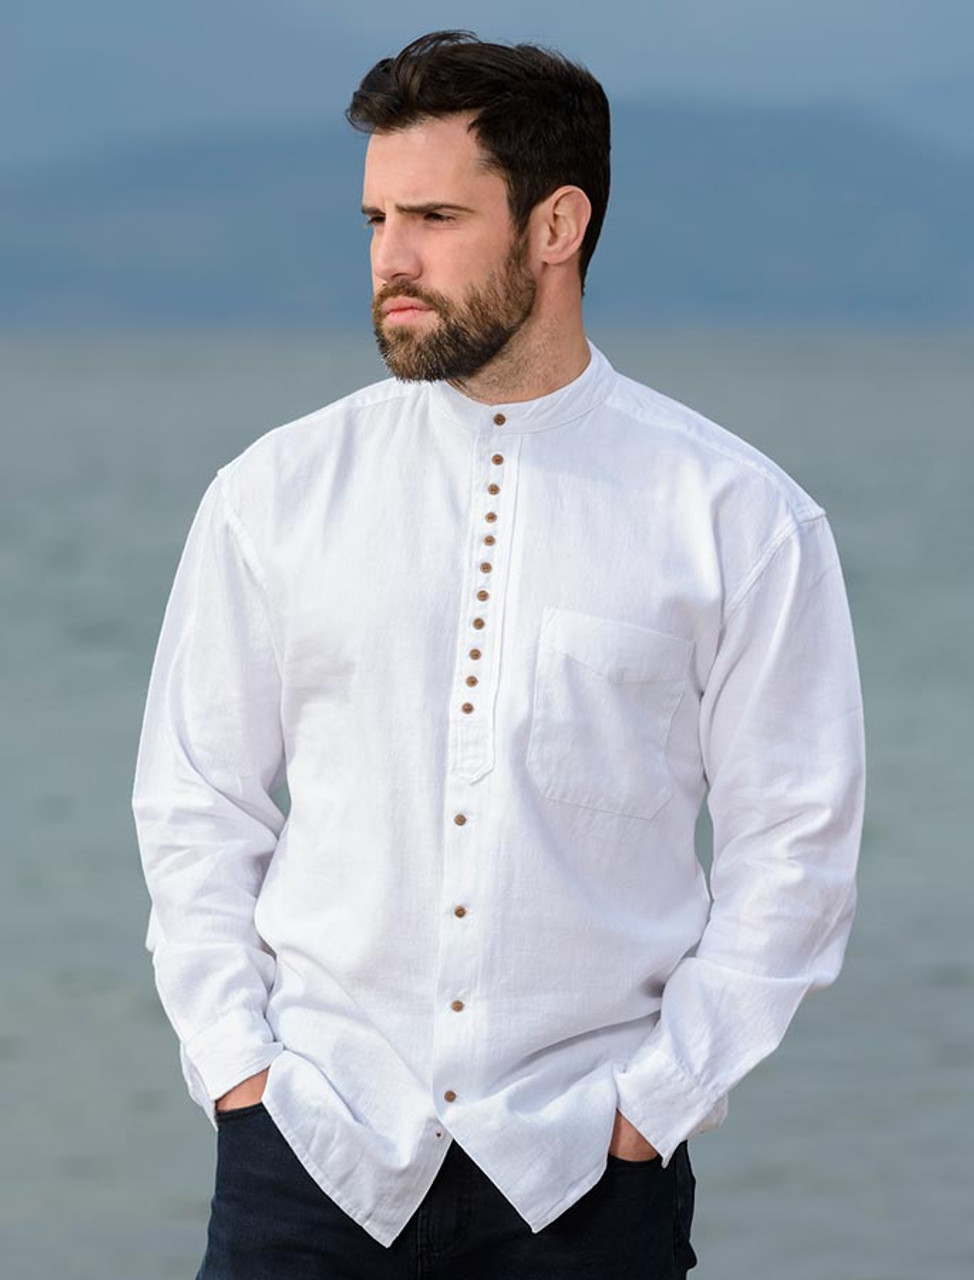 Grandfather Shirts From Weavers Of Ireland [Free Express Shipping]